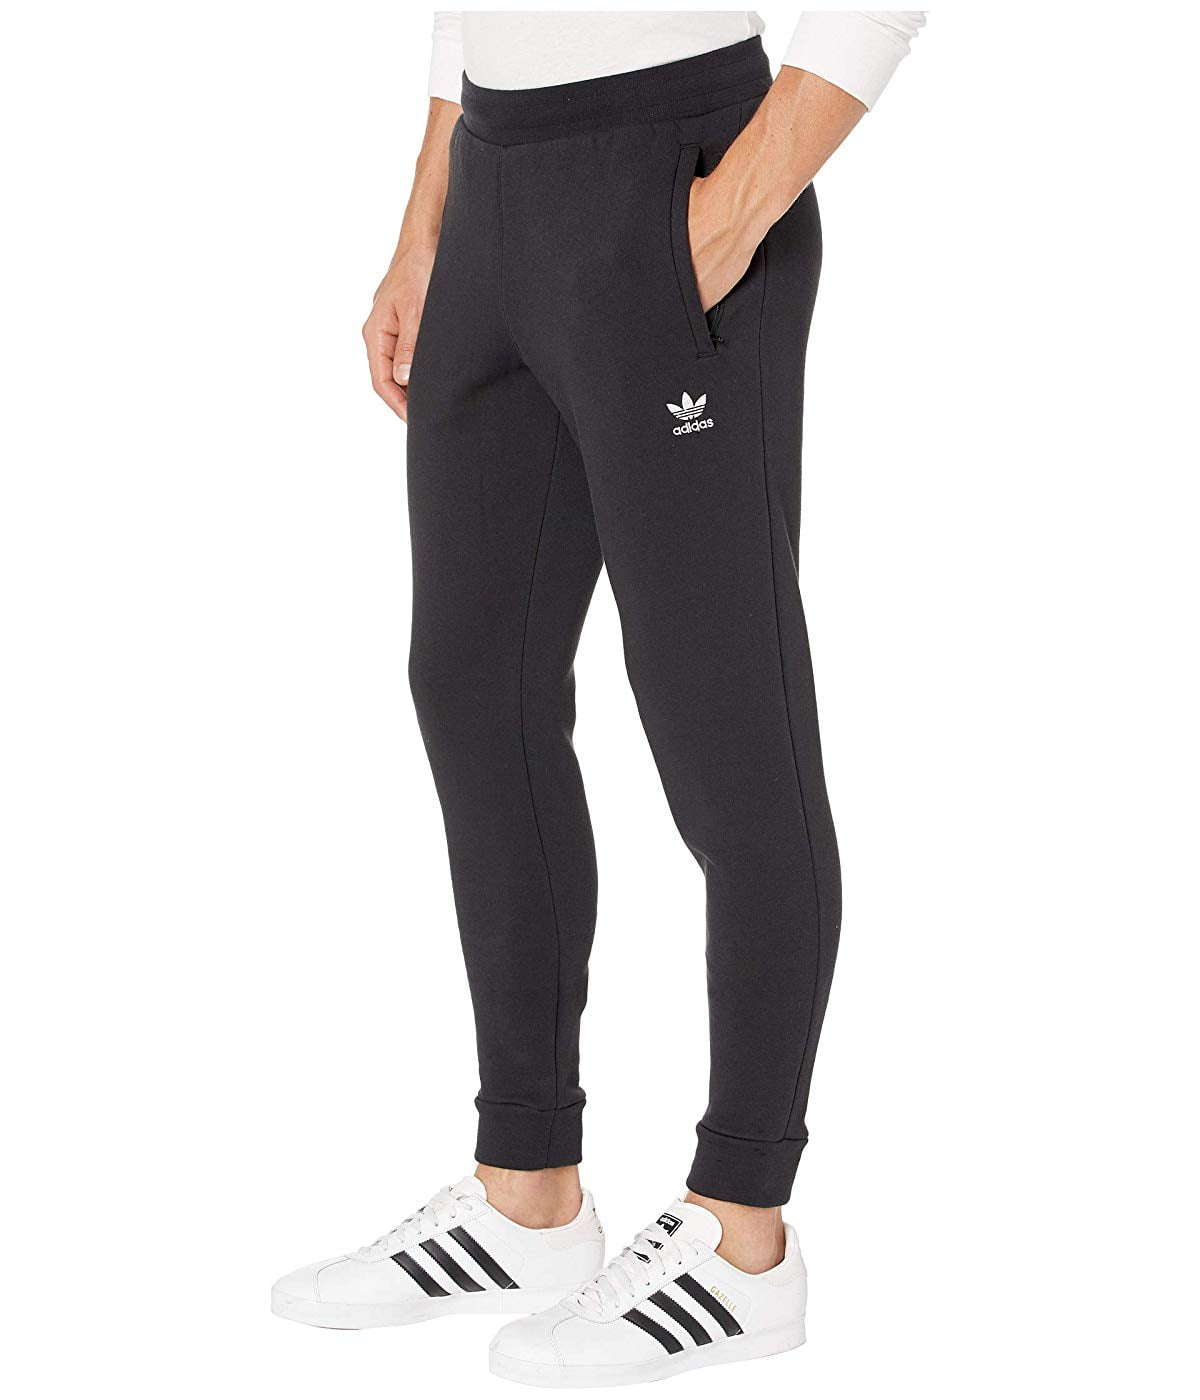  adidas Men's Big Mood 3/4 Tights, Black Small : Clothing,  Shoes & Jewelry